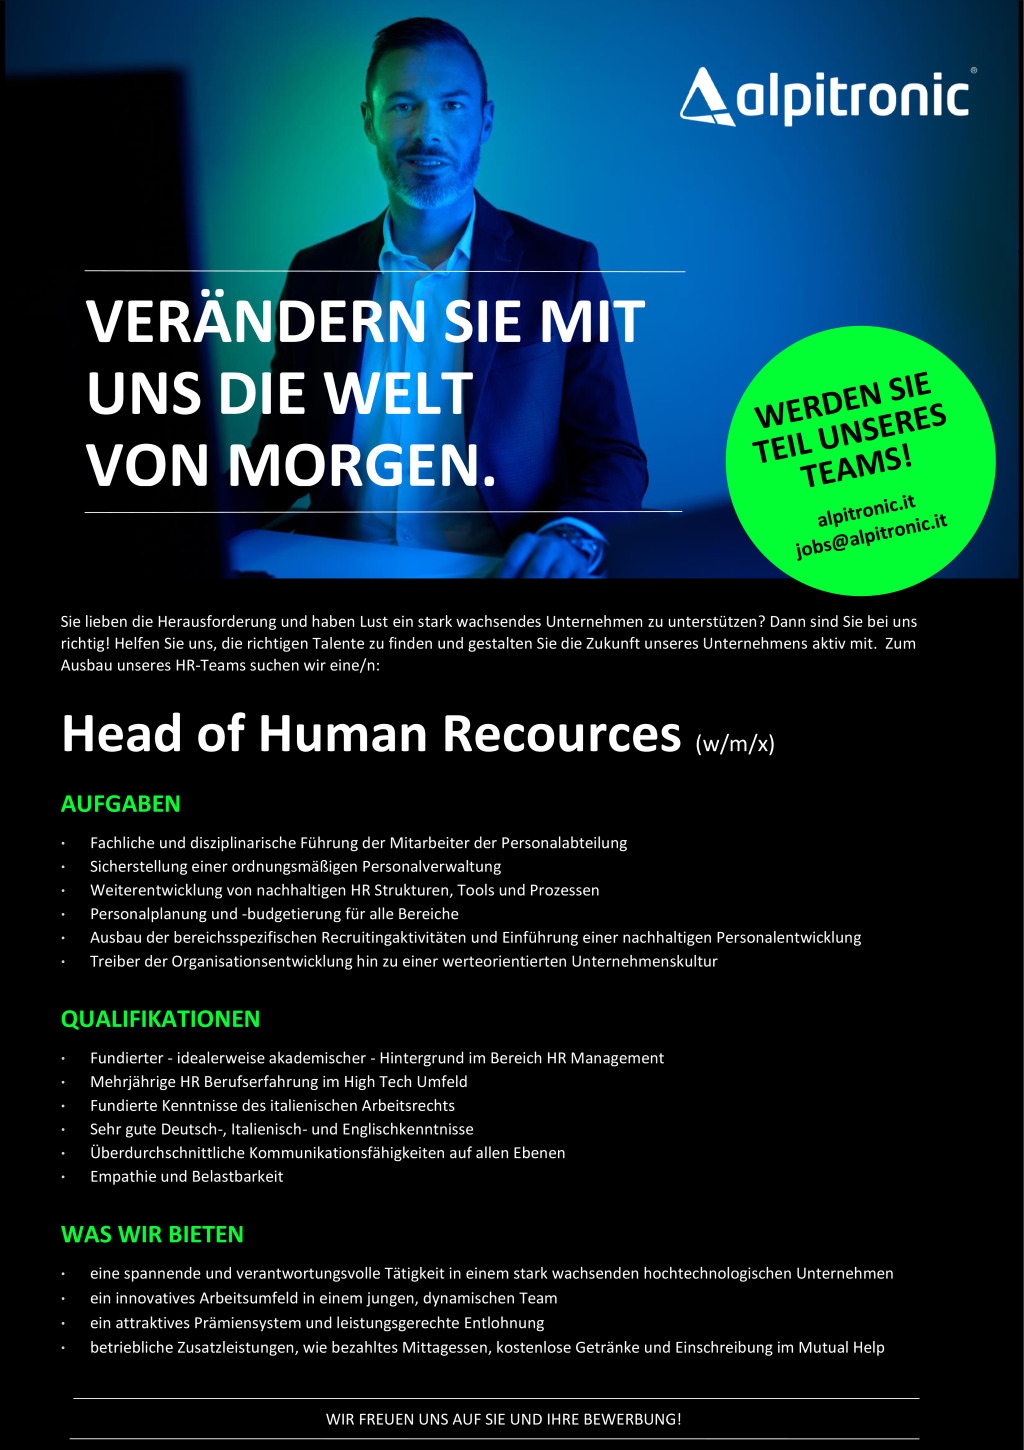 Head of Human Resources (w/m/x)